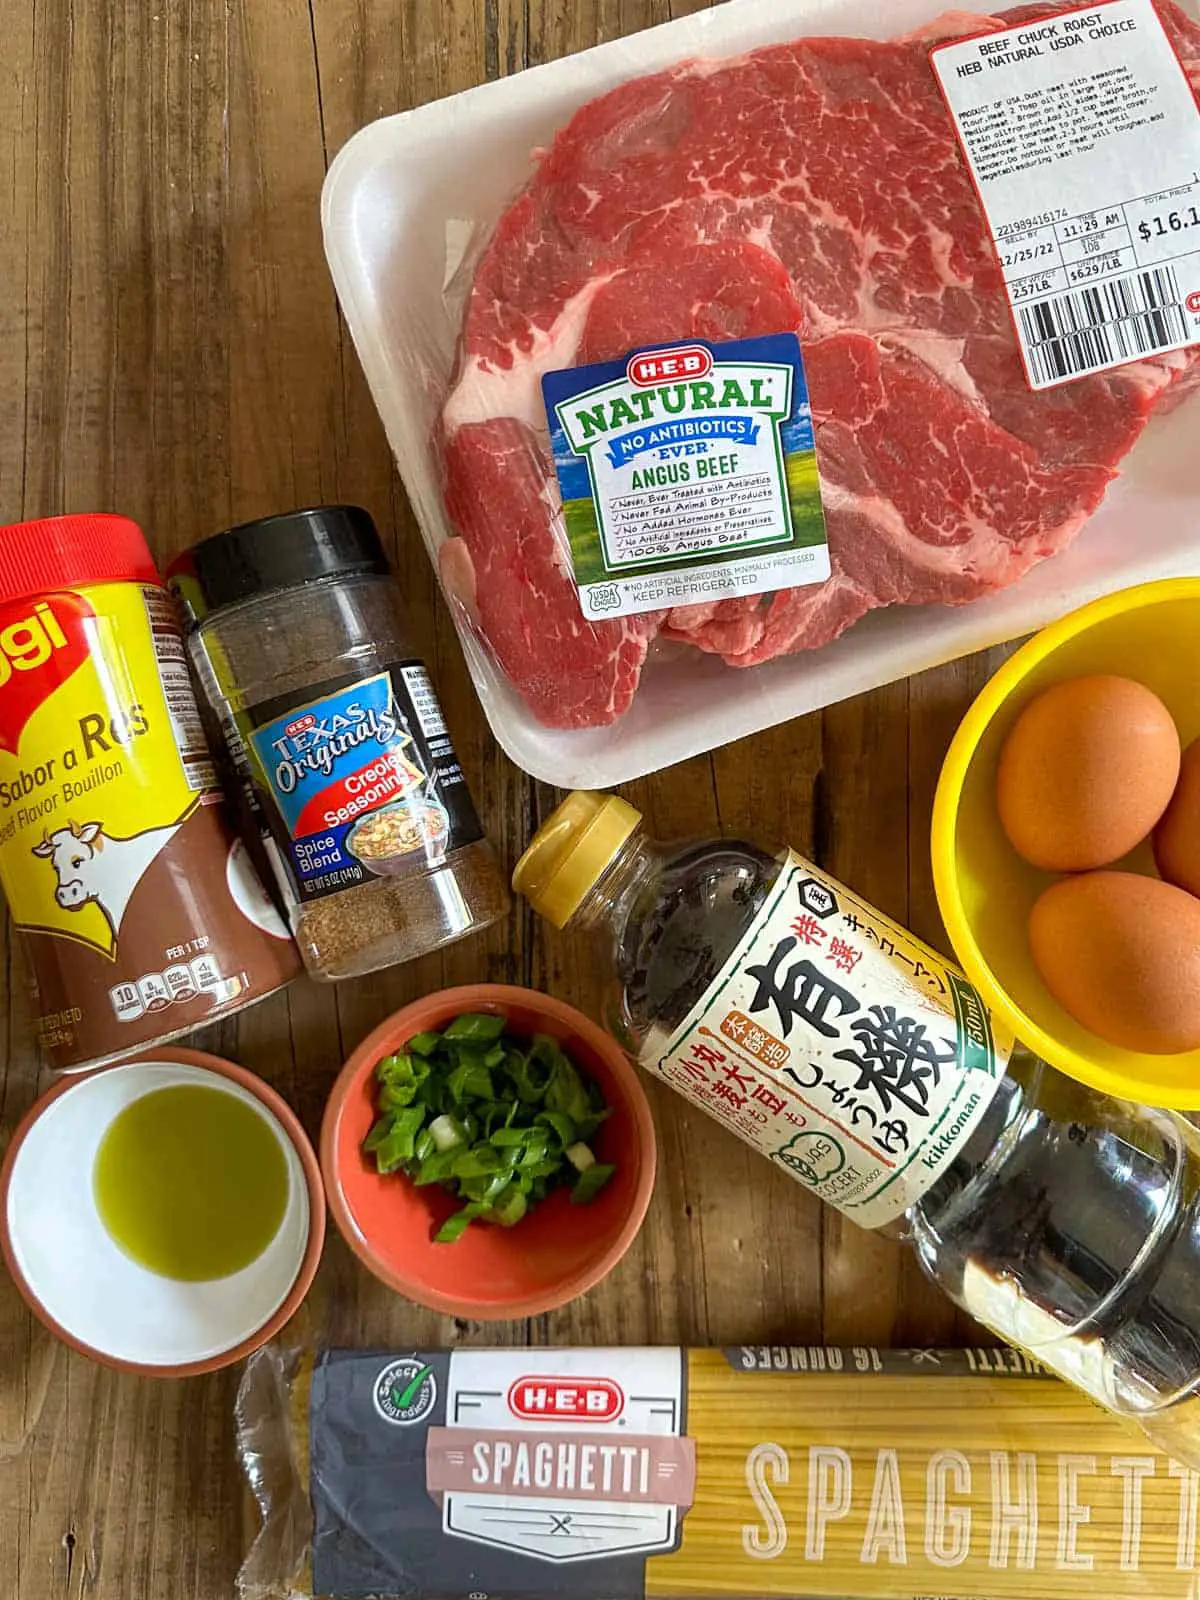 A package of beef chuck roast, Maggi beef bouillon seasoning, Creole seasoning, olive oil in a small bowl, minced green onions in a small bowl, bottle of soy sauce, package of spaghetti, and a yellow bowl containing eggs.